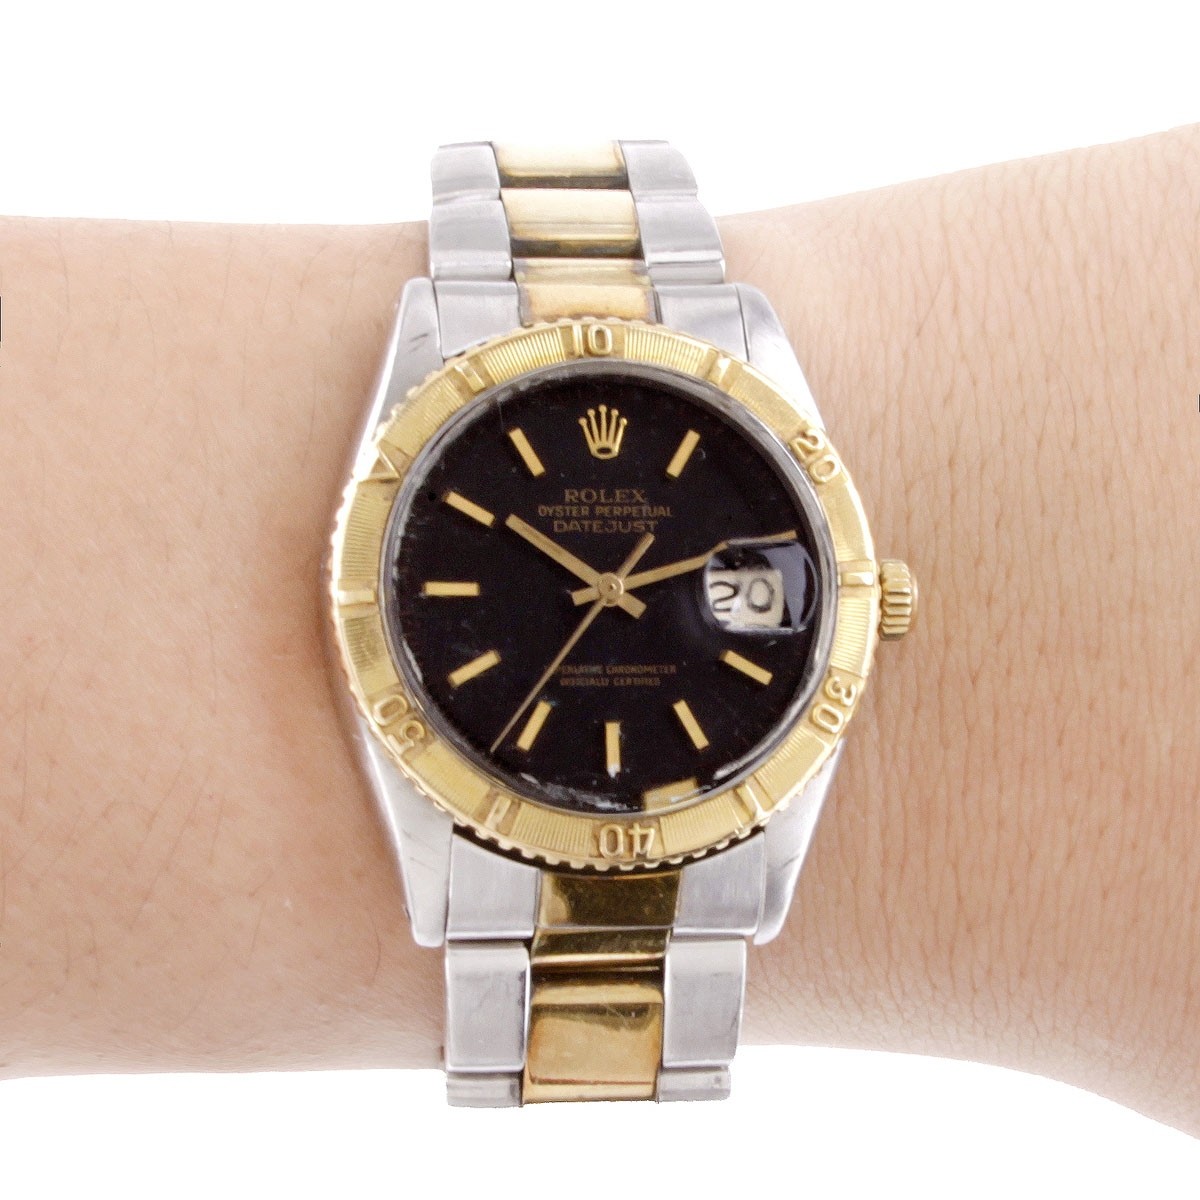 Man's Rolex S/S and 18K Date-Just 1625